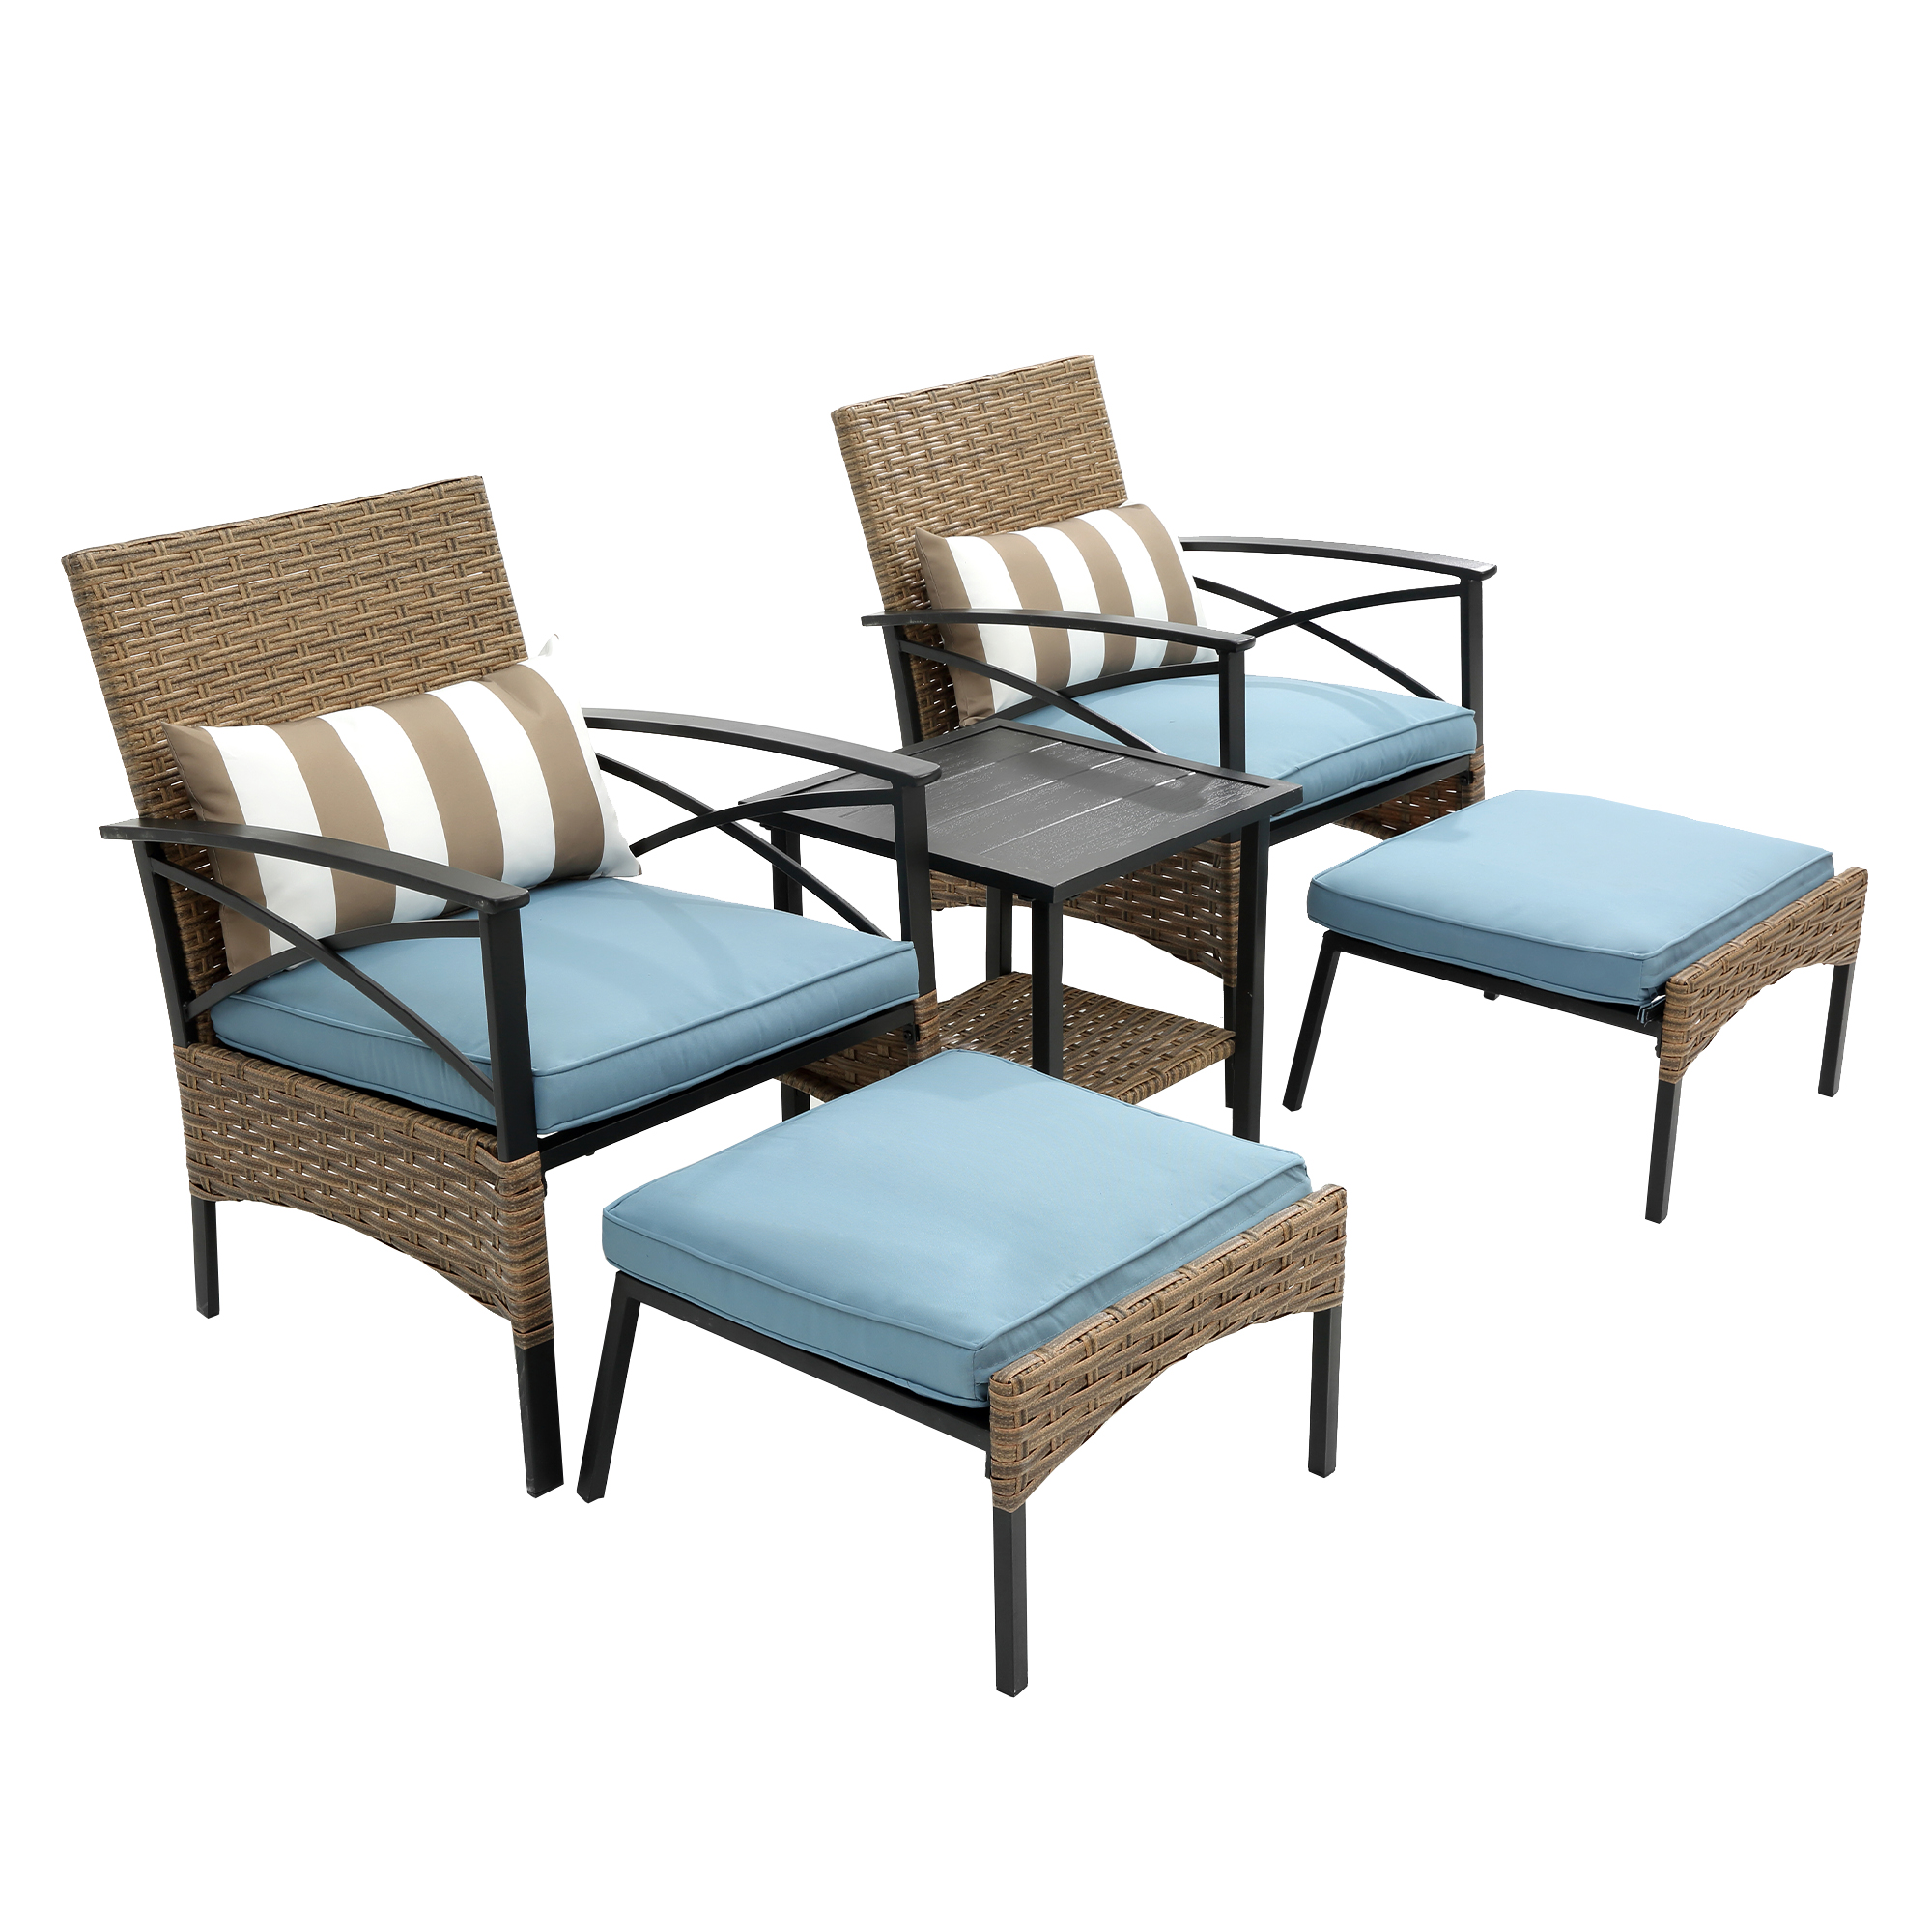 SYNGAR 5 Piece Outdoor Patio Furniture Set, PE Rattan Sectional Furniture Set with Coffee Table, Cushioned Chair and Ottoman, Patio Conversation Sofa Set, for Garden, Yard, Deck, Poolside, Blue, D1067 - image 4 of 10